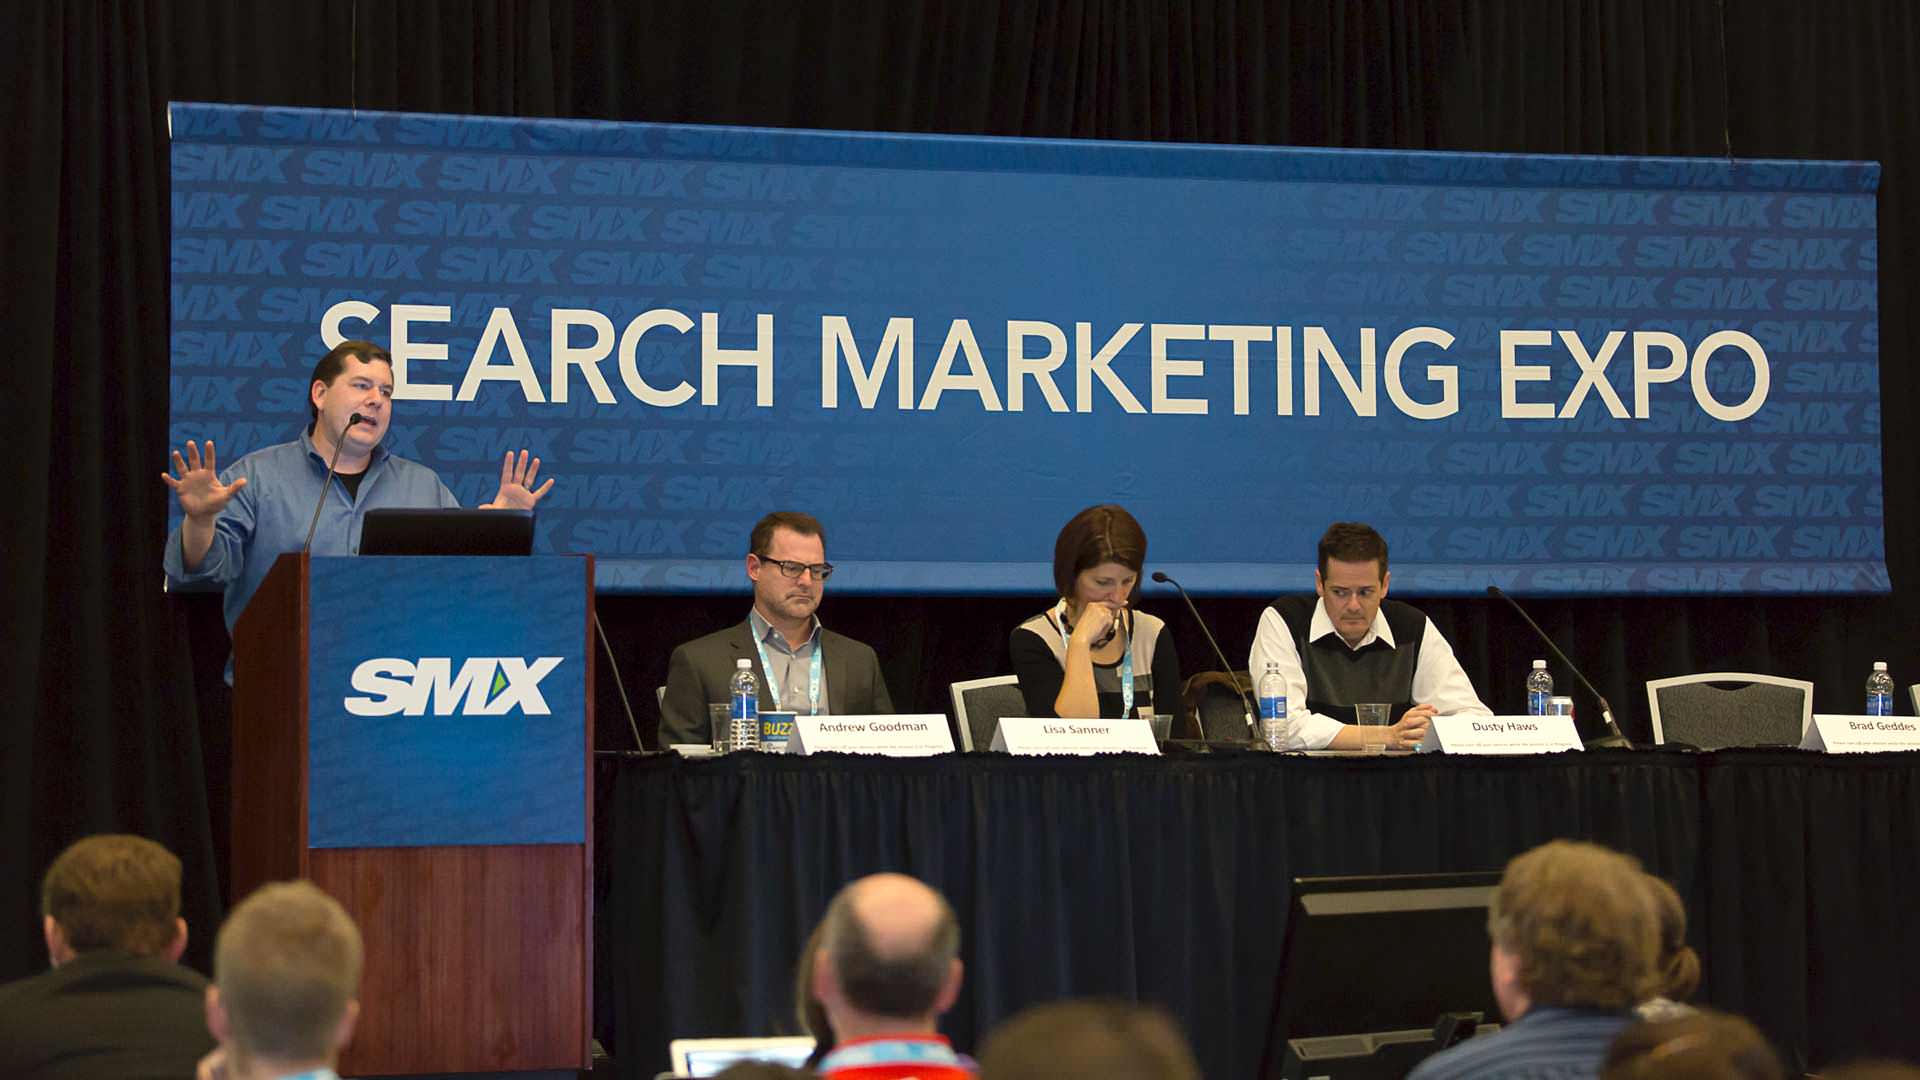 Speaking at SMX